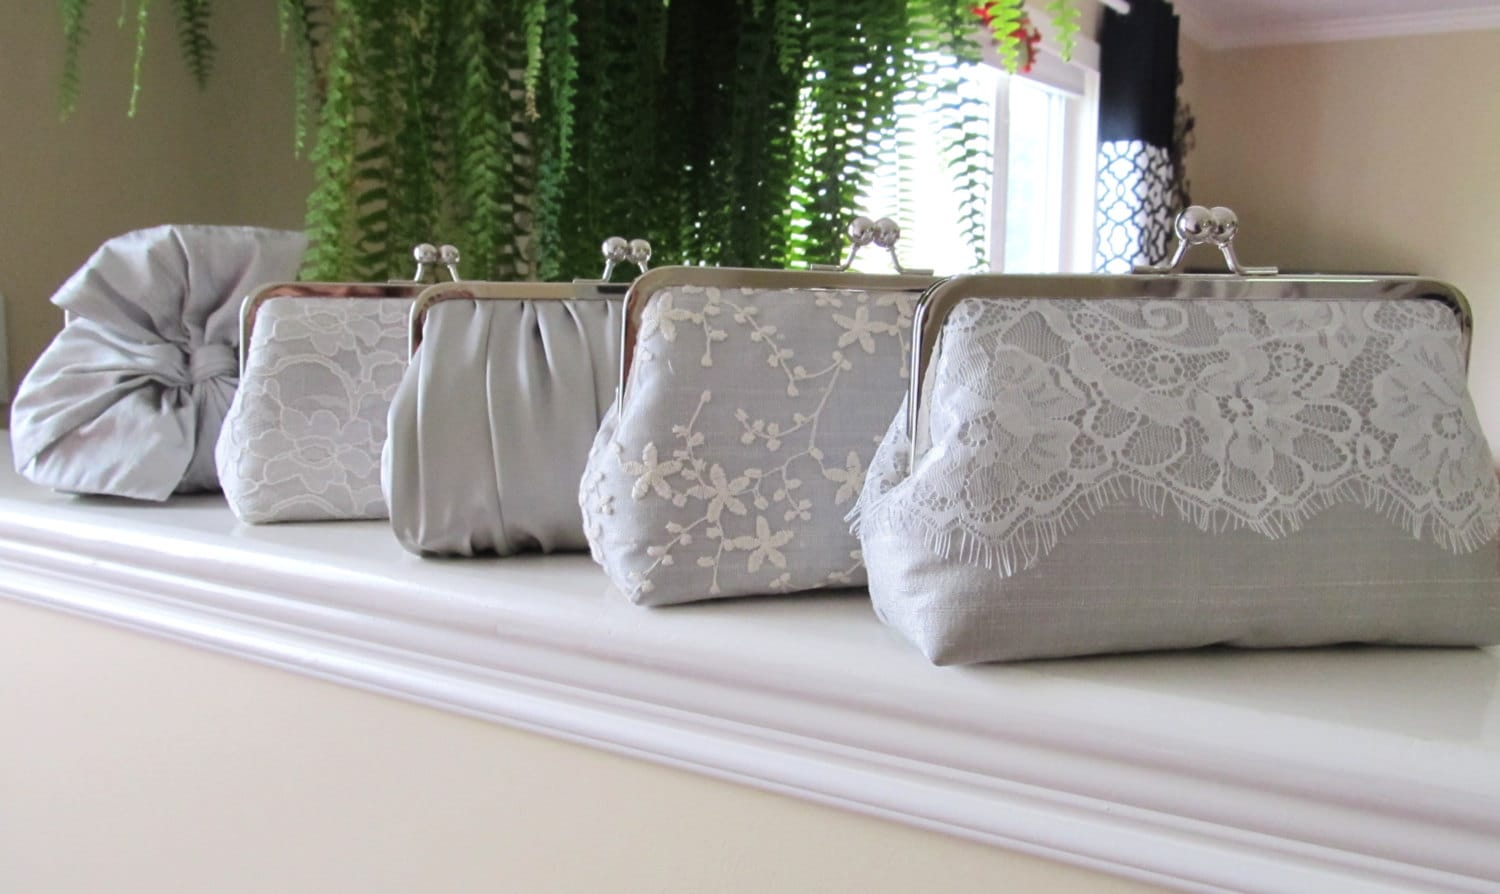 SALE, 20% Off, Mis Matched Bridesmaid Clutches Set of 5,Bridal Accessories,Wedding Clutch,Lace Clutch,Bridesmaid Clutch